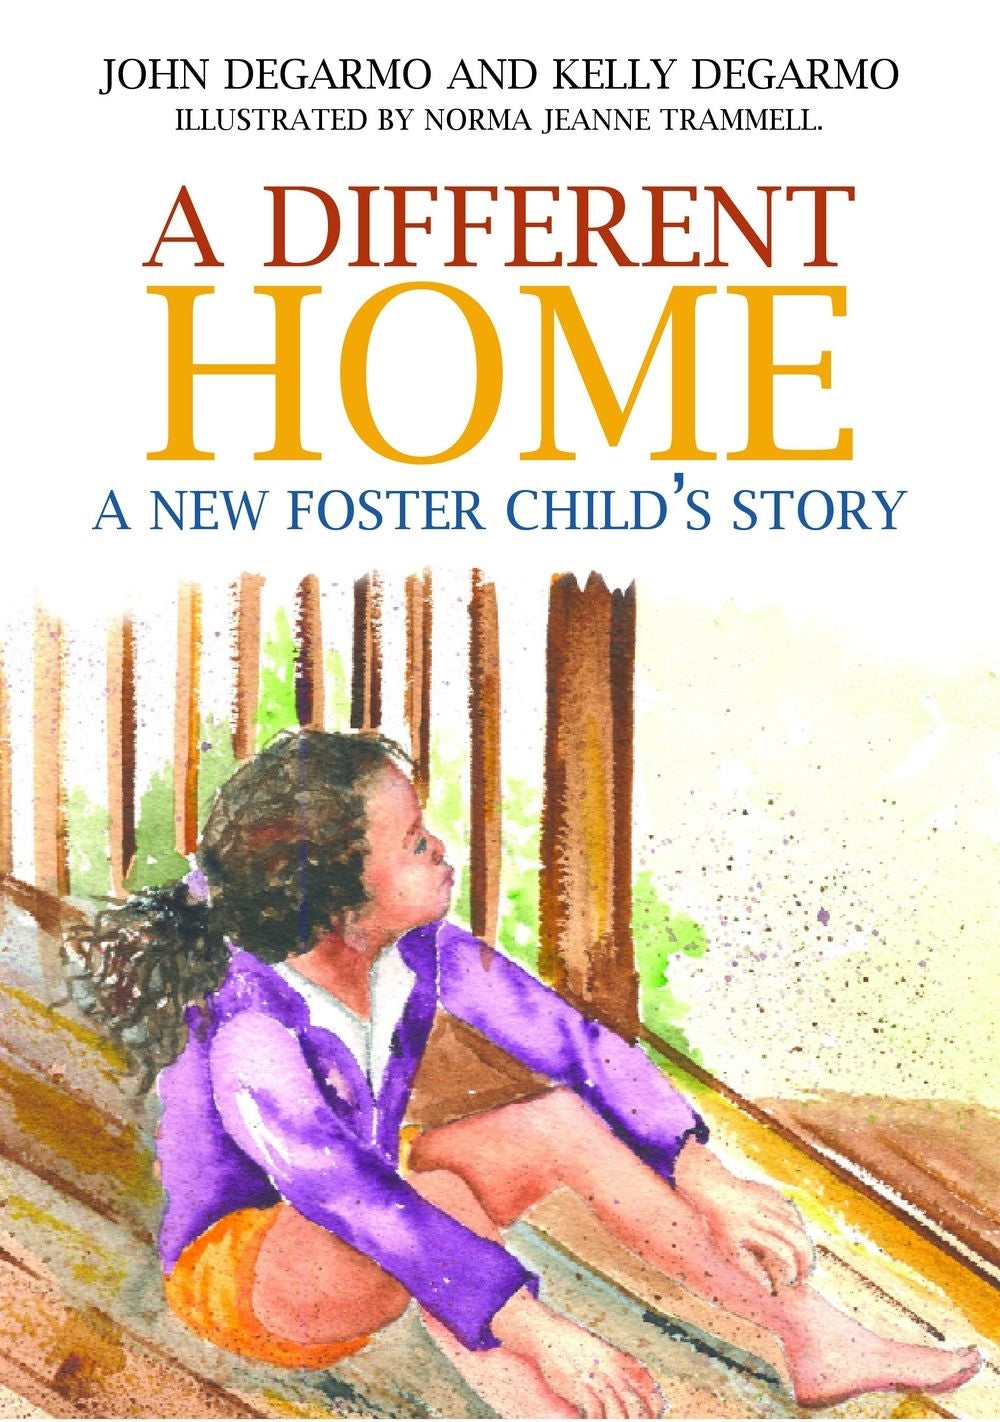 A Different Home by Norma Jeanne Trammell, John DeGarmo, Dr Kelly Degarmo